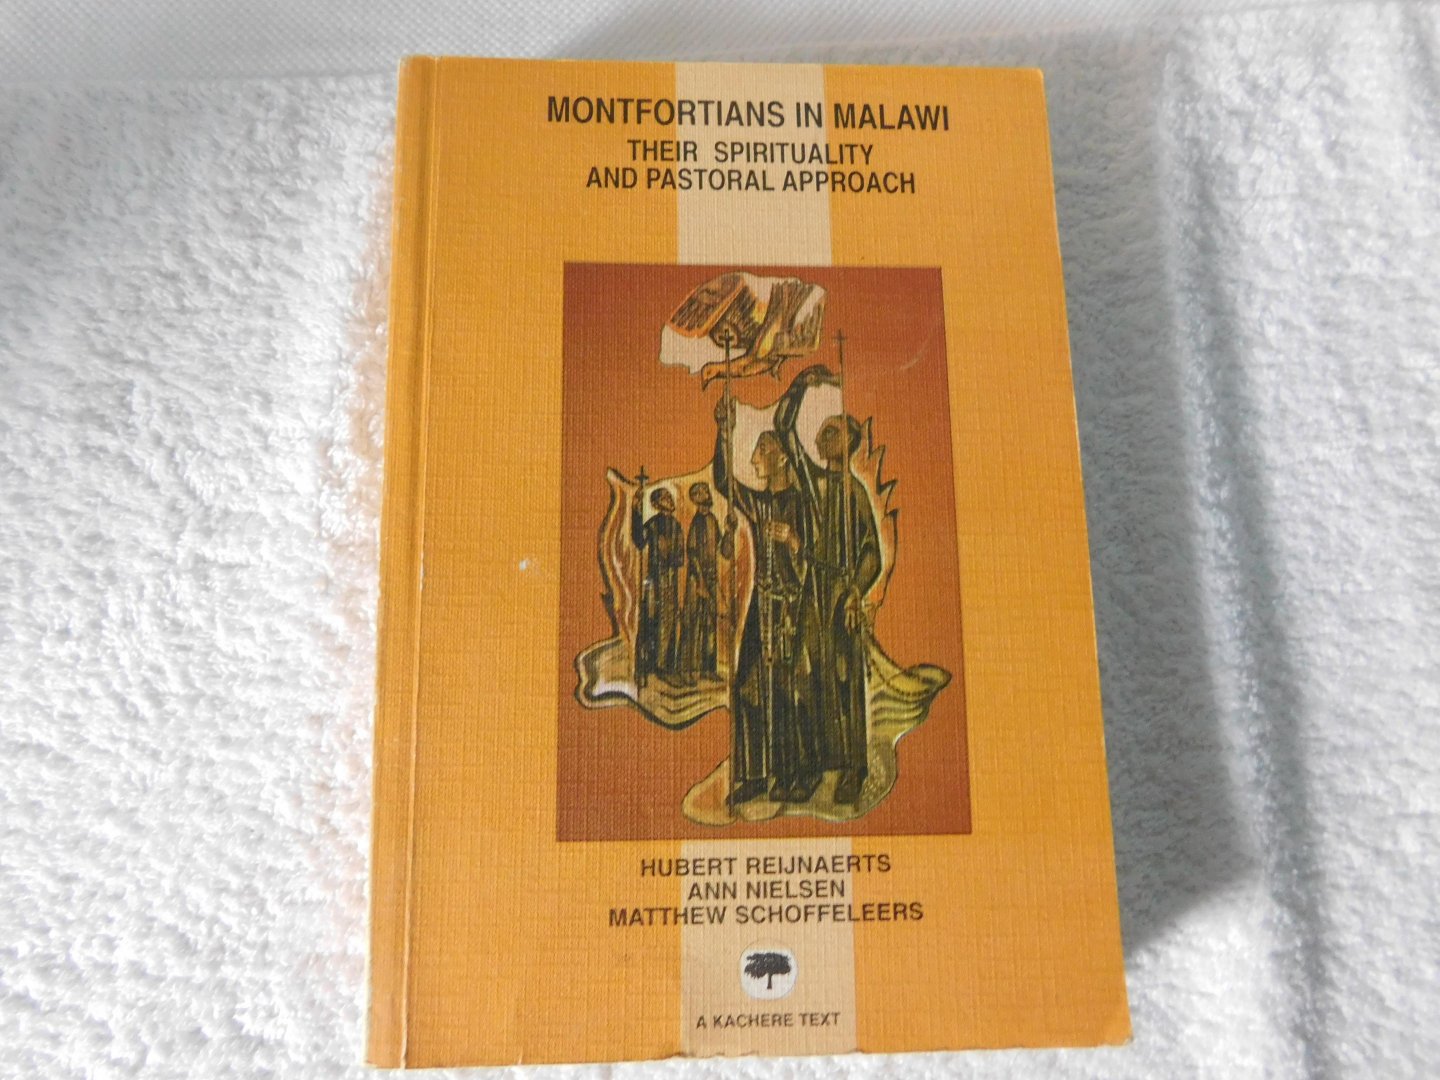 Hubert Reijnaerts - Montfortians in Malawi: Their Spirituality and Pastoral Approach (Kachere Texts)